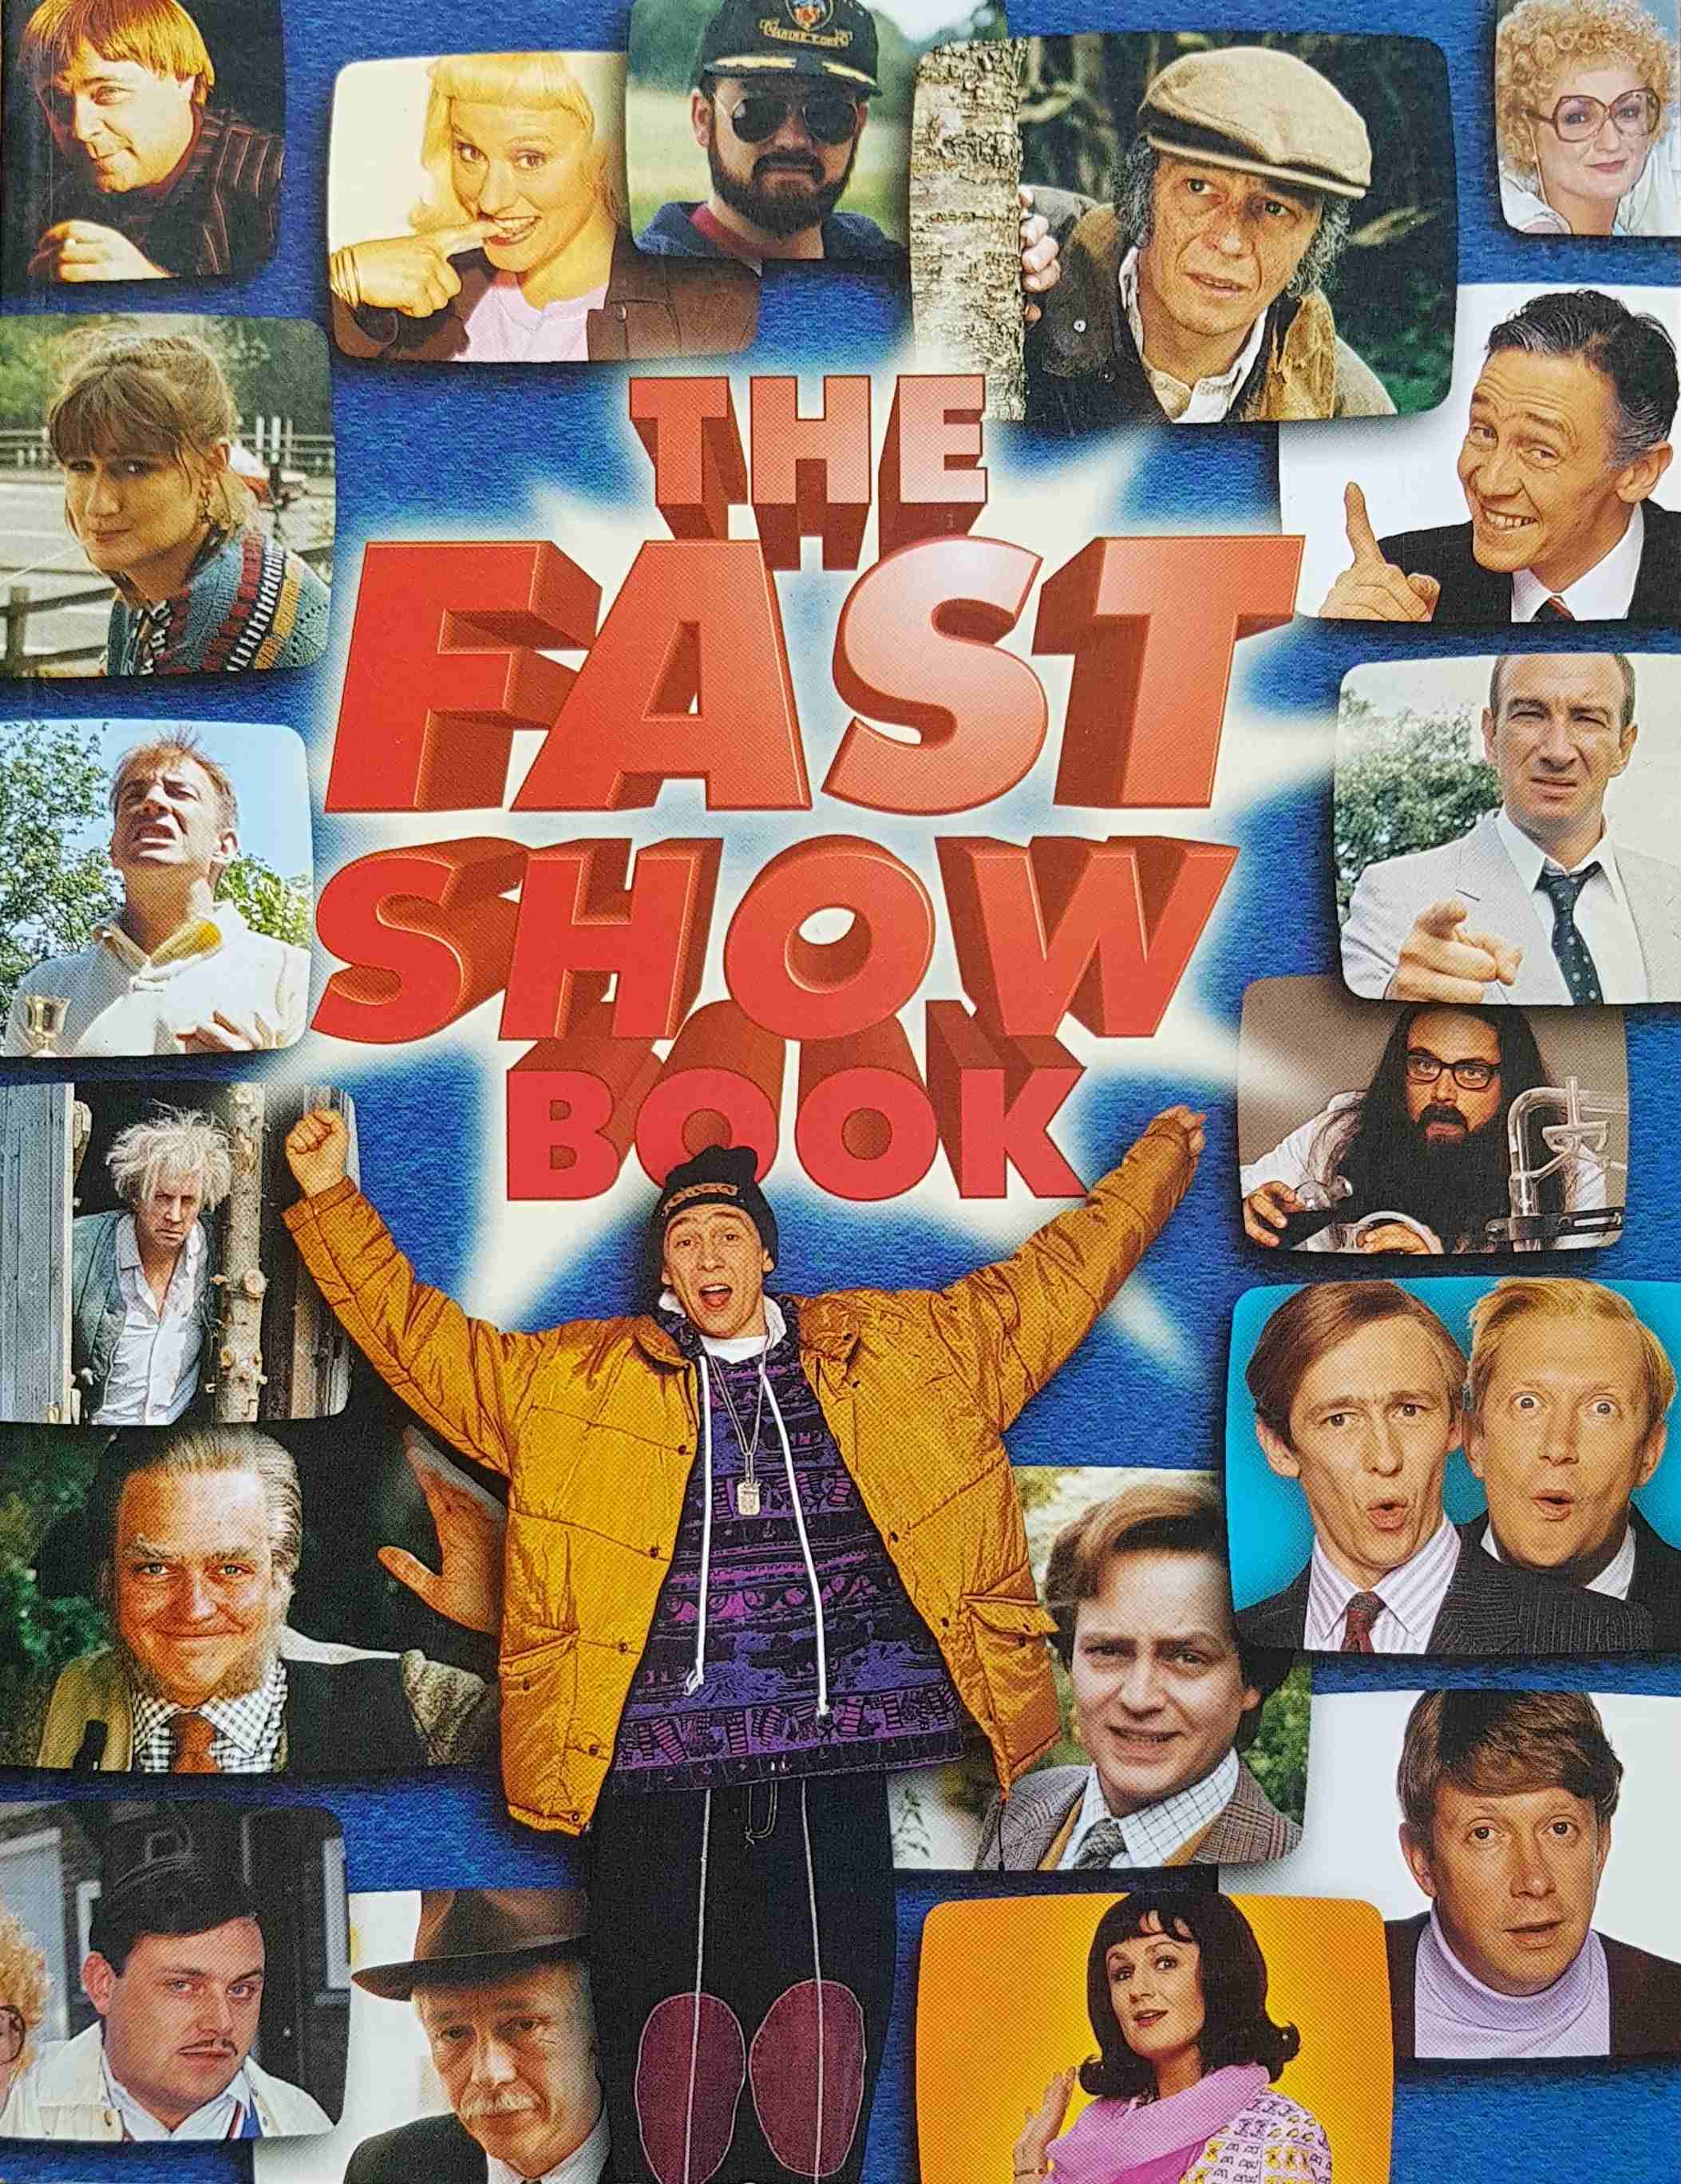 Picture of 0-752-22267-8 The fast show book by artist Various from the BBC books - Records and Tapes library